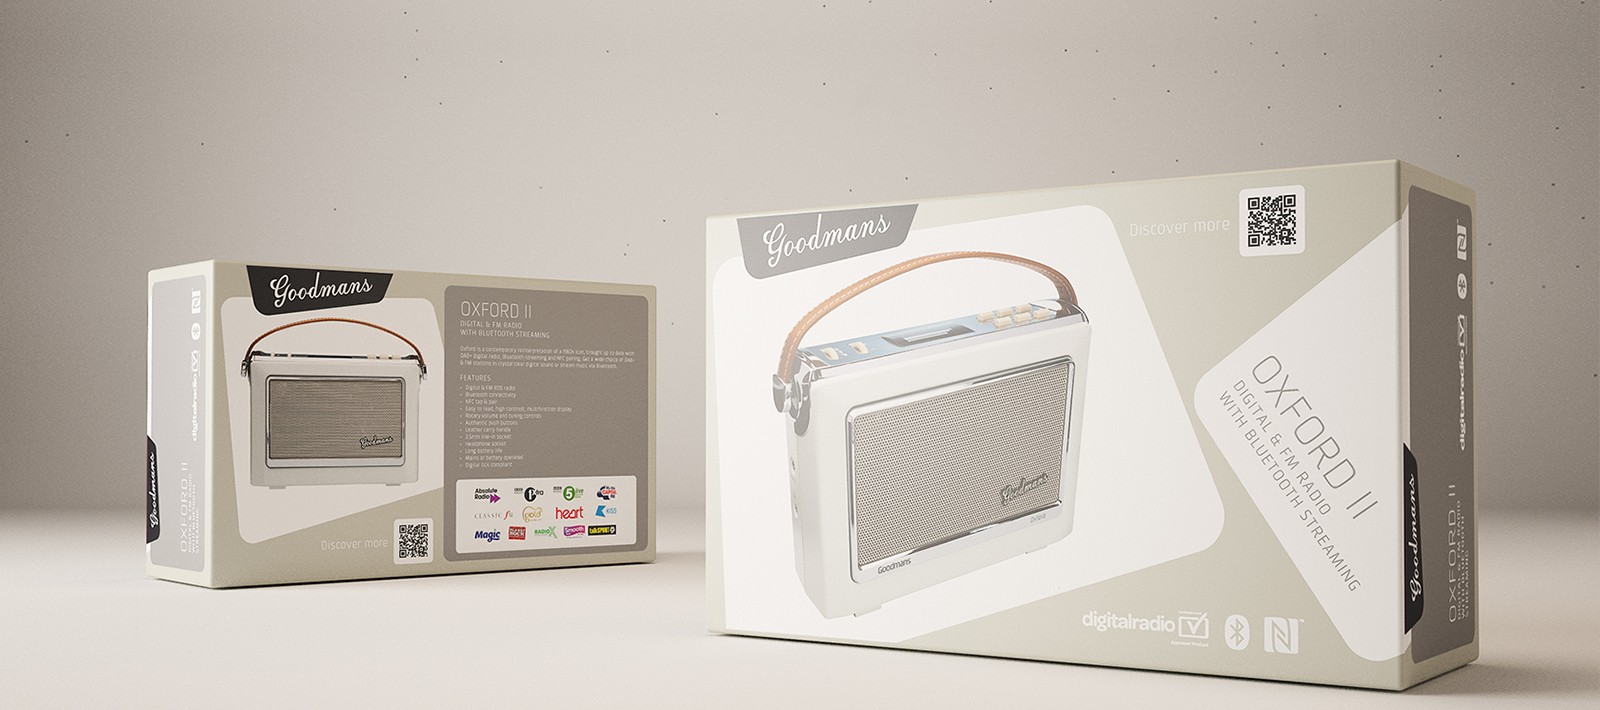 consumer electronics packaging design